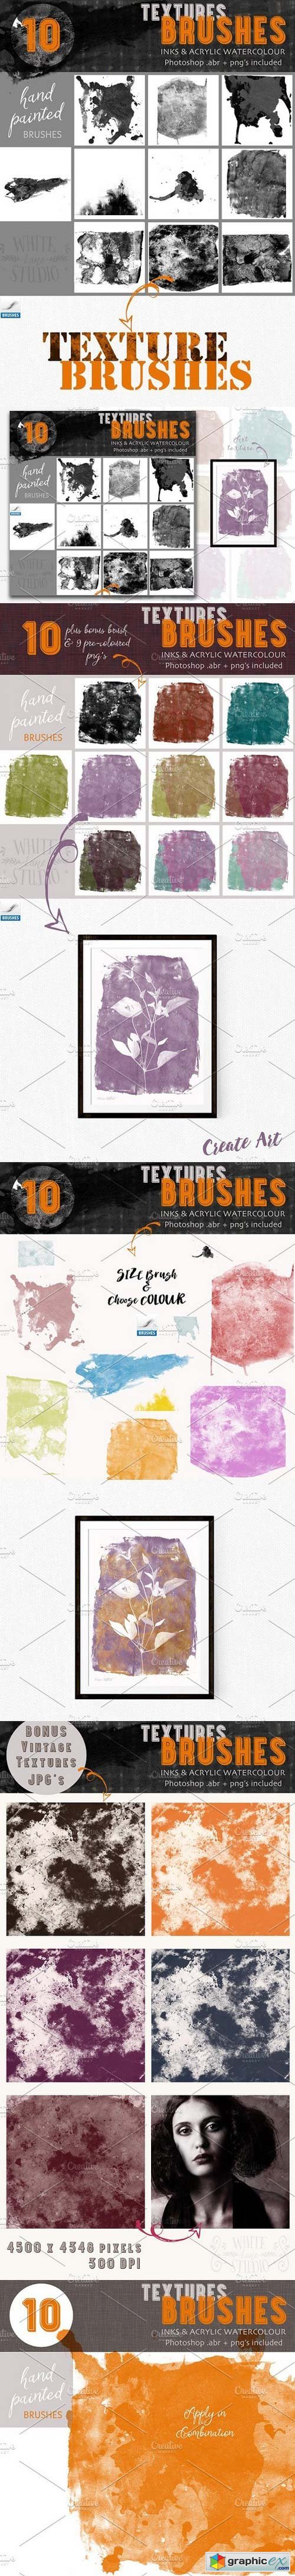 Textures Brushes- Inks & Acrylics